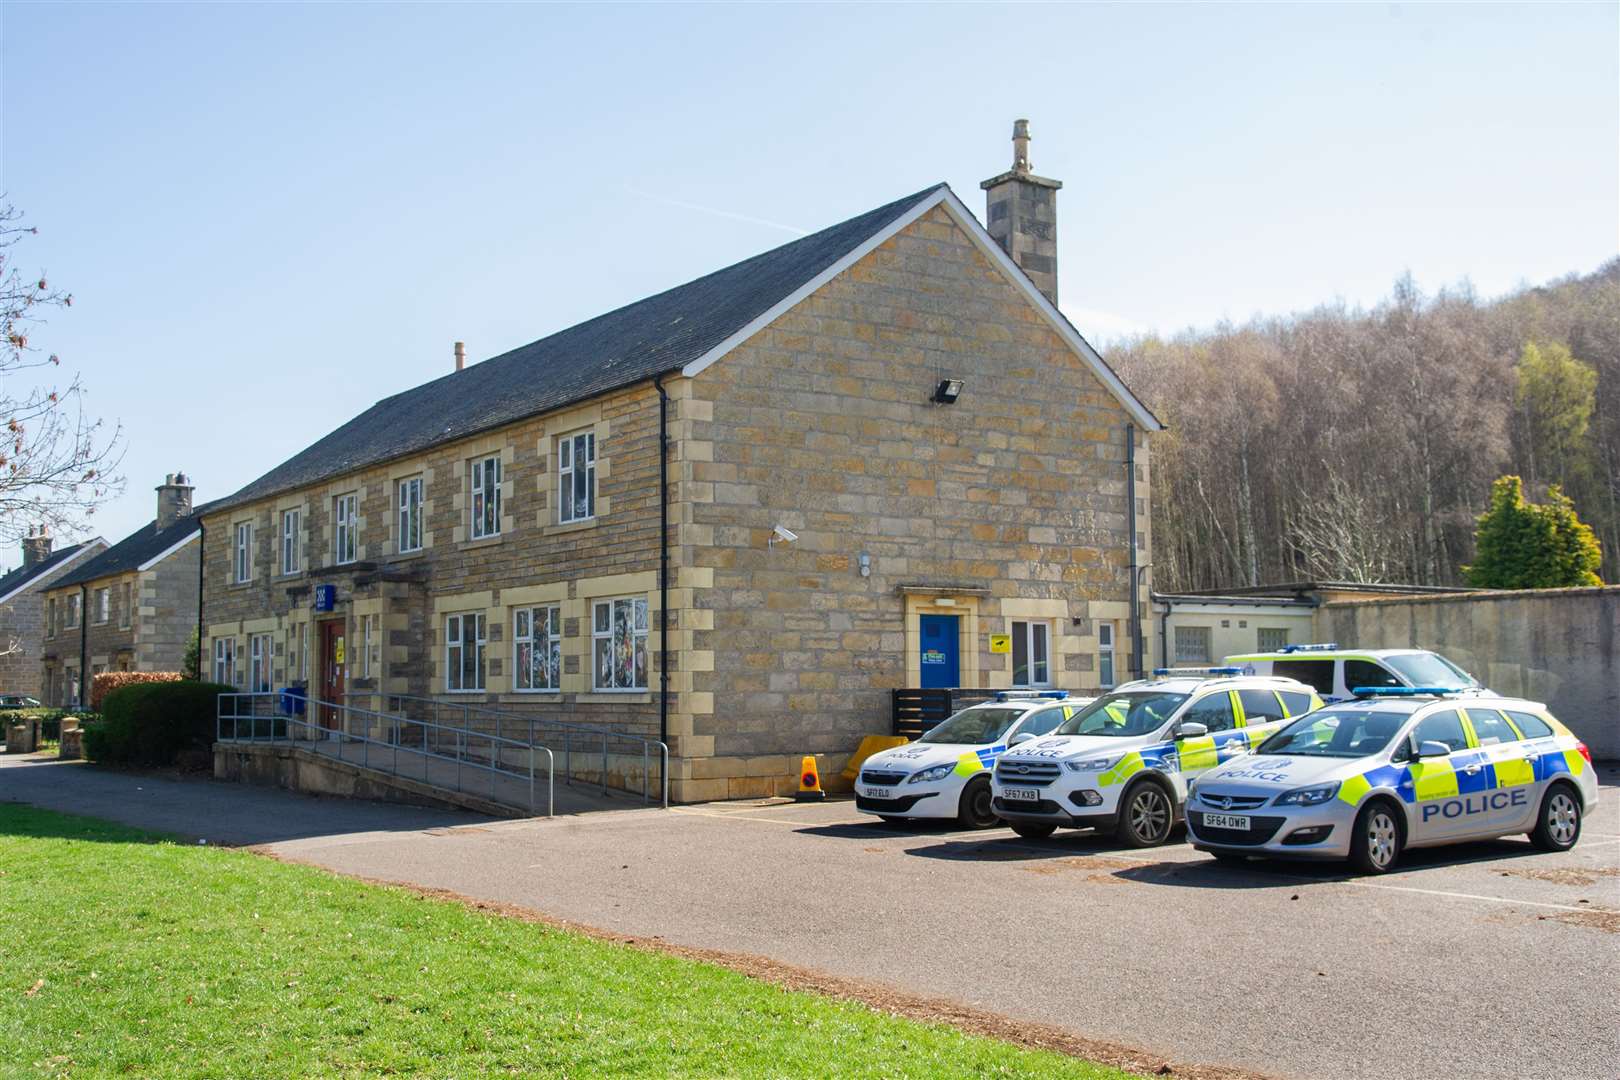 Forres Police Station on Victoria Road. Picture: Highland News & Media.